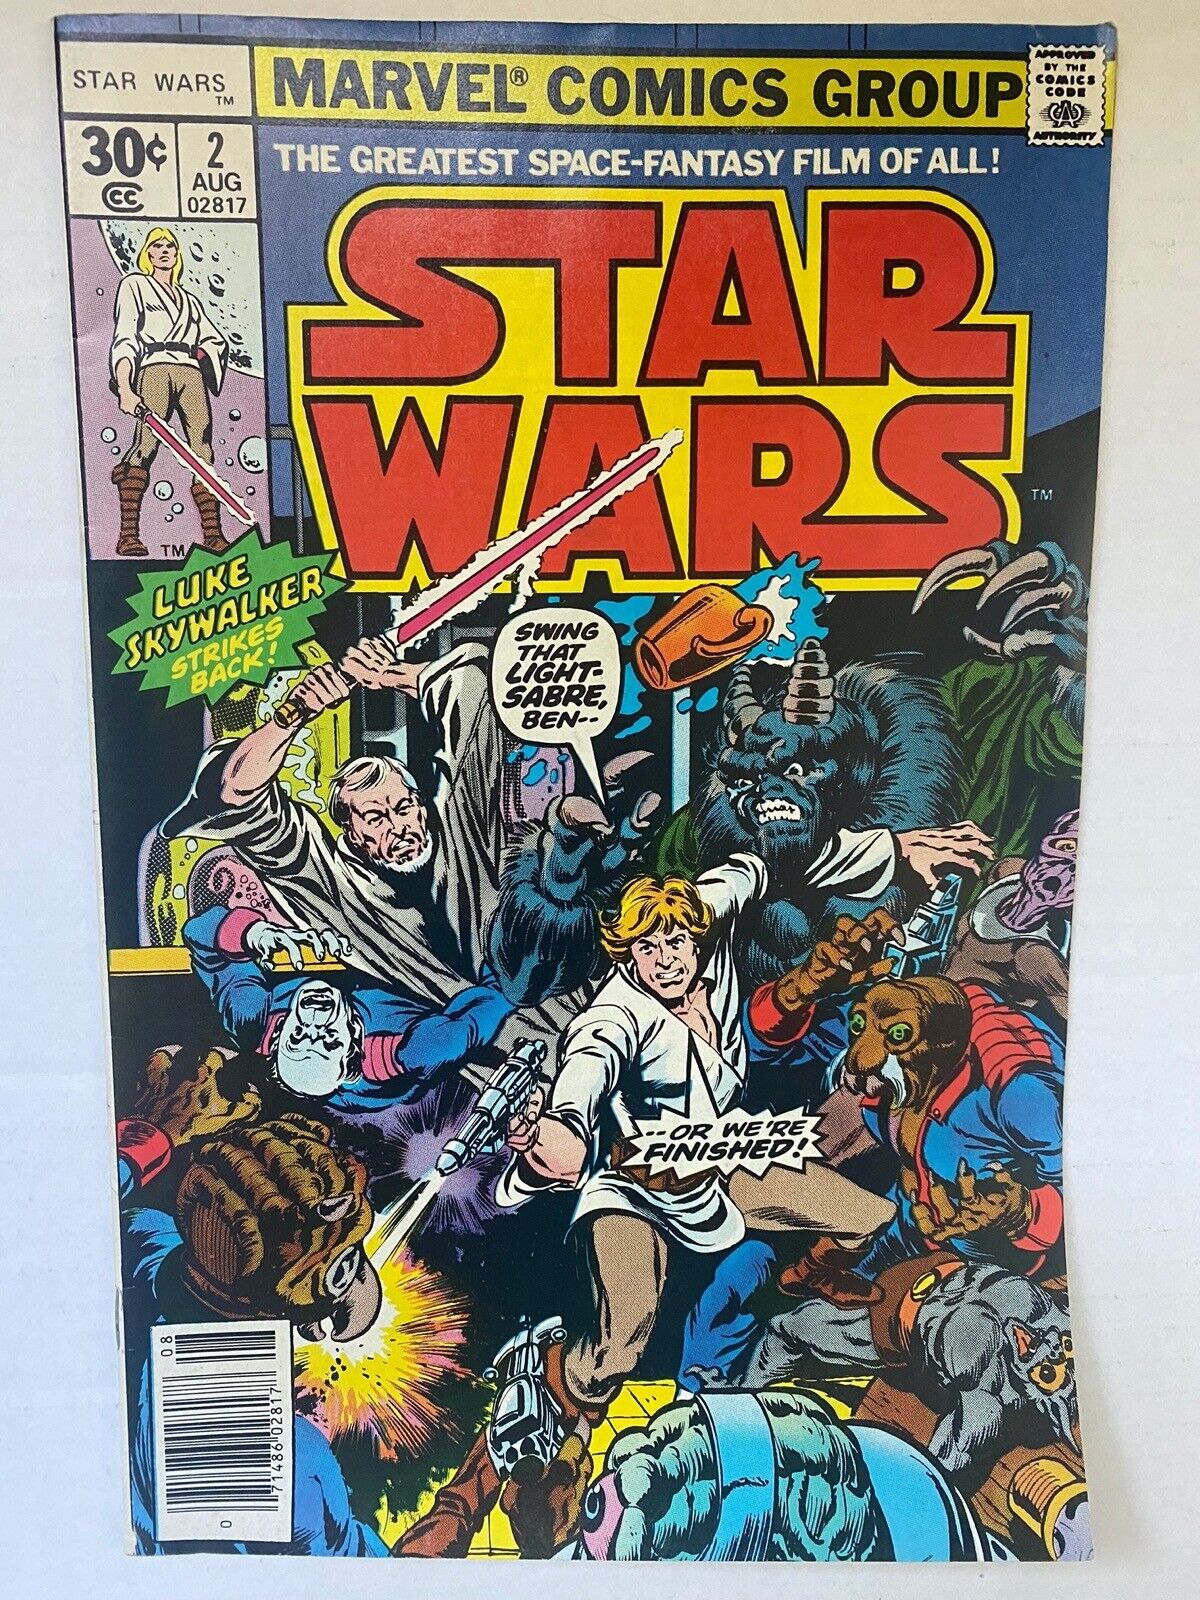 STAR WARS #2 (of 6) Original 30¢ Six Against the Galaxy (A NEW HOPE) 1977 Marvel